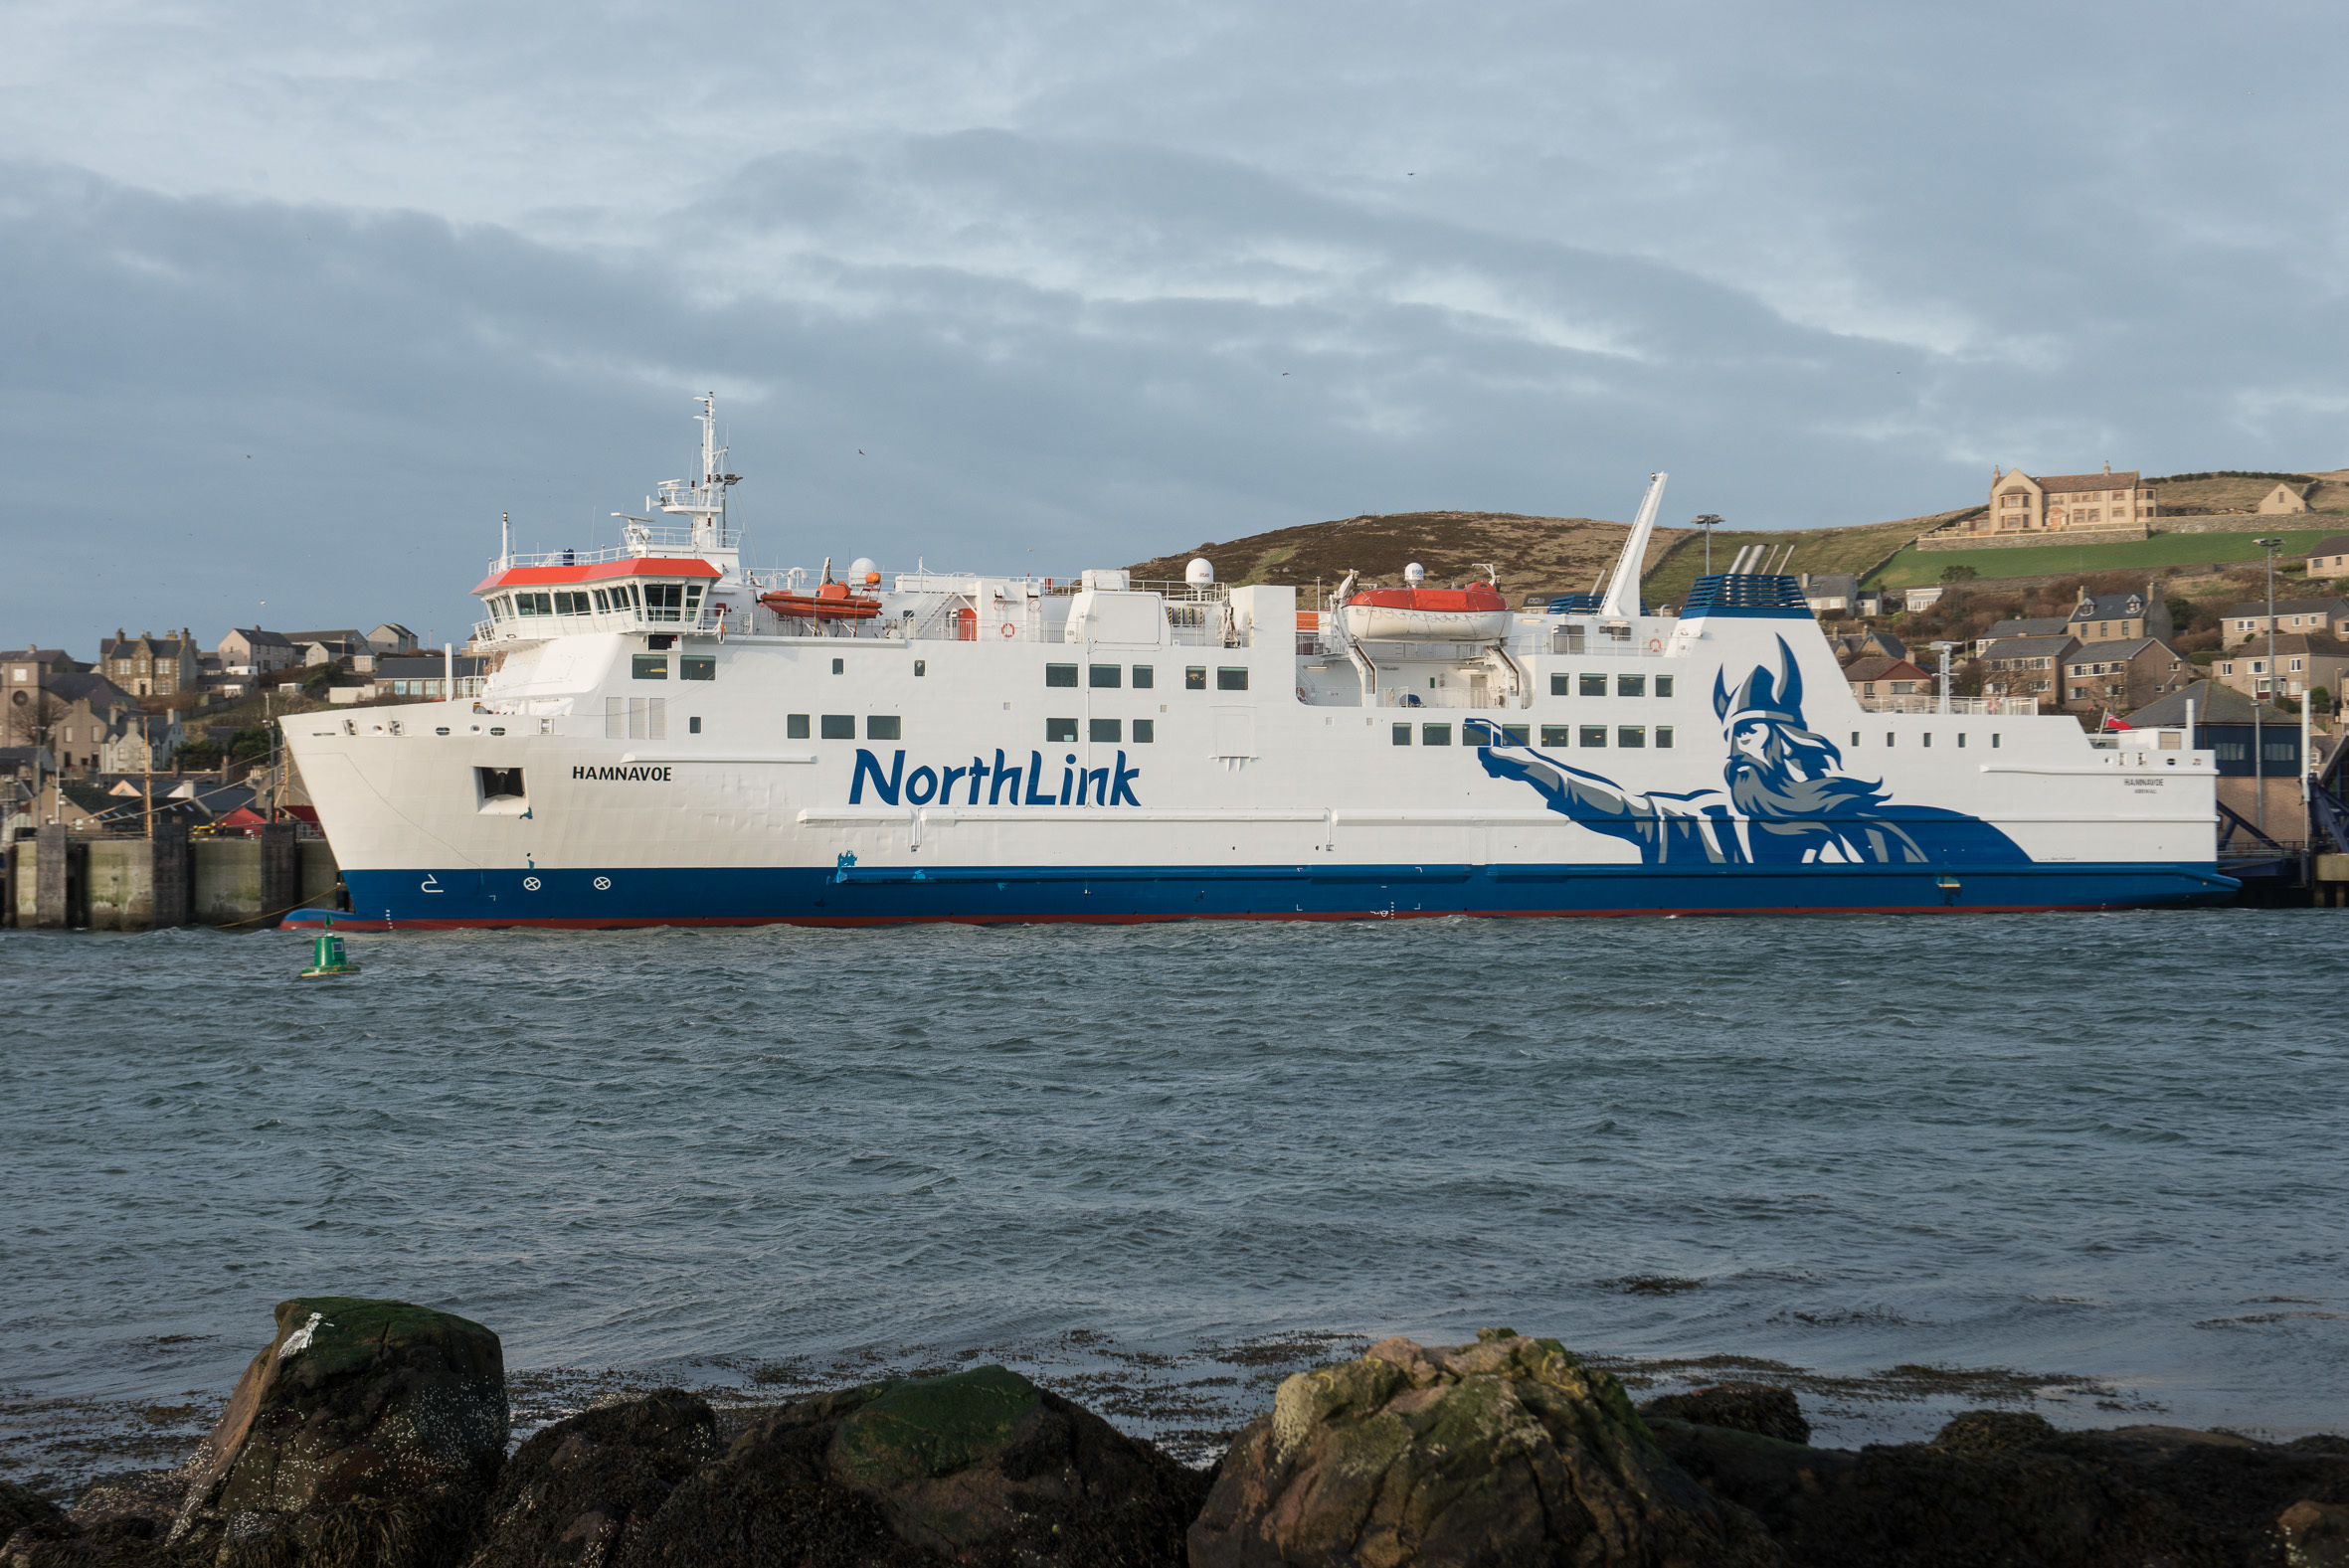 NorthLink Ferries has given the Royal Society for the Protection of Birds (RSPB) a donation of £2,200 to help fund the charities community outreach programme